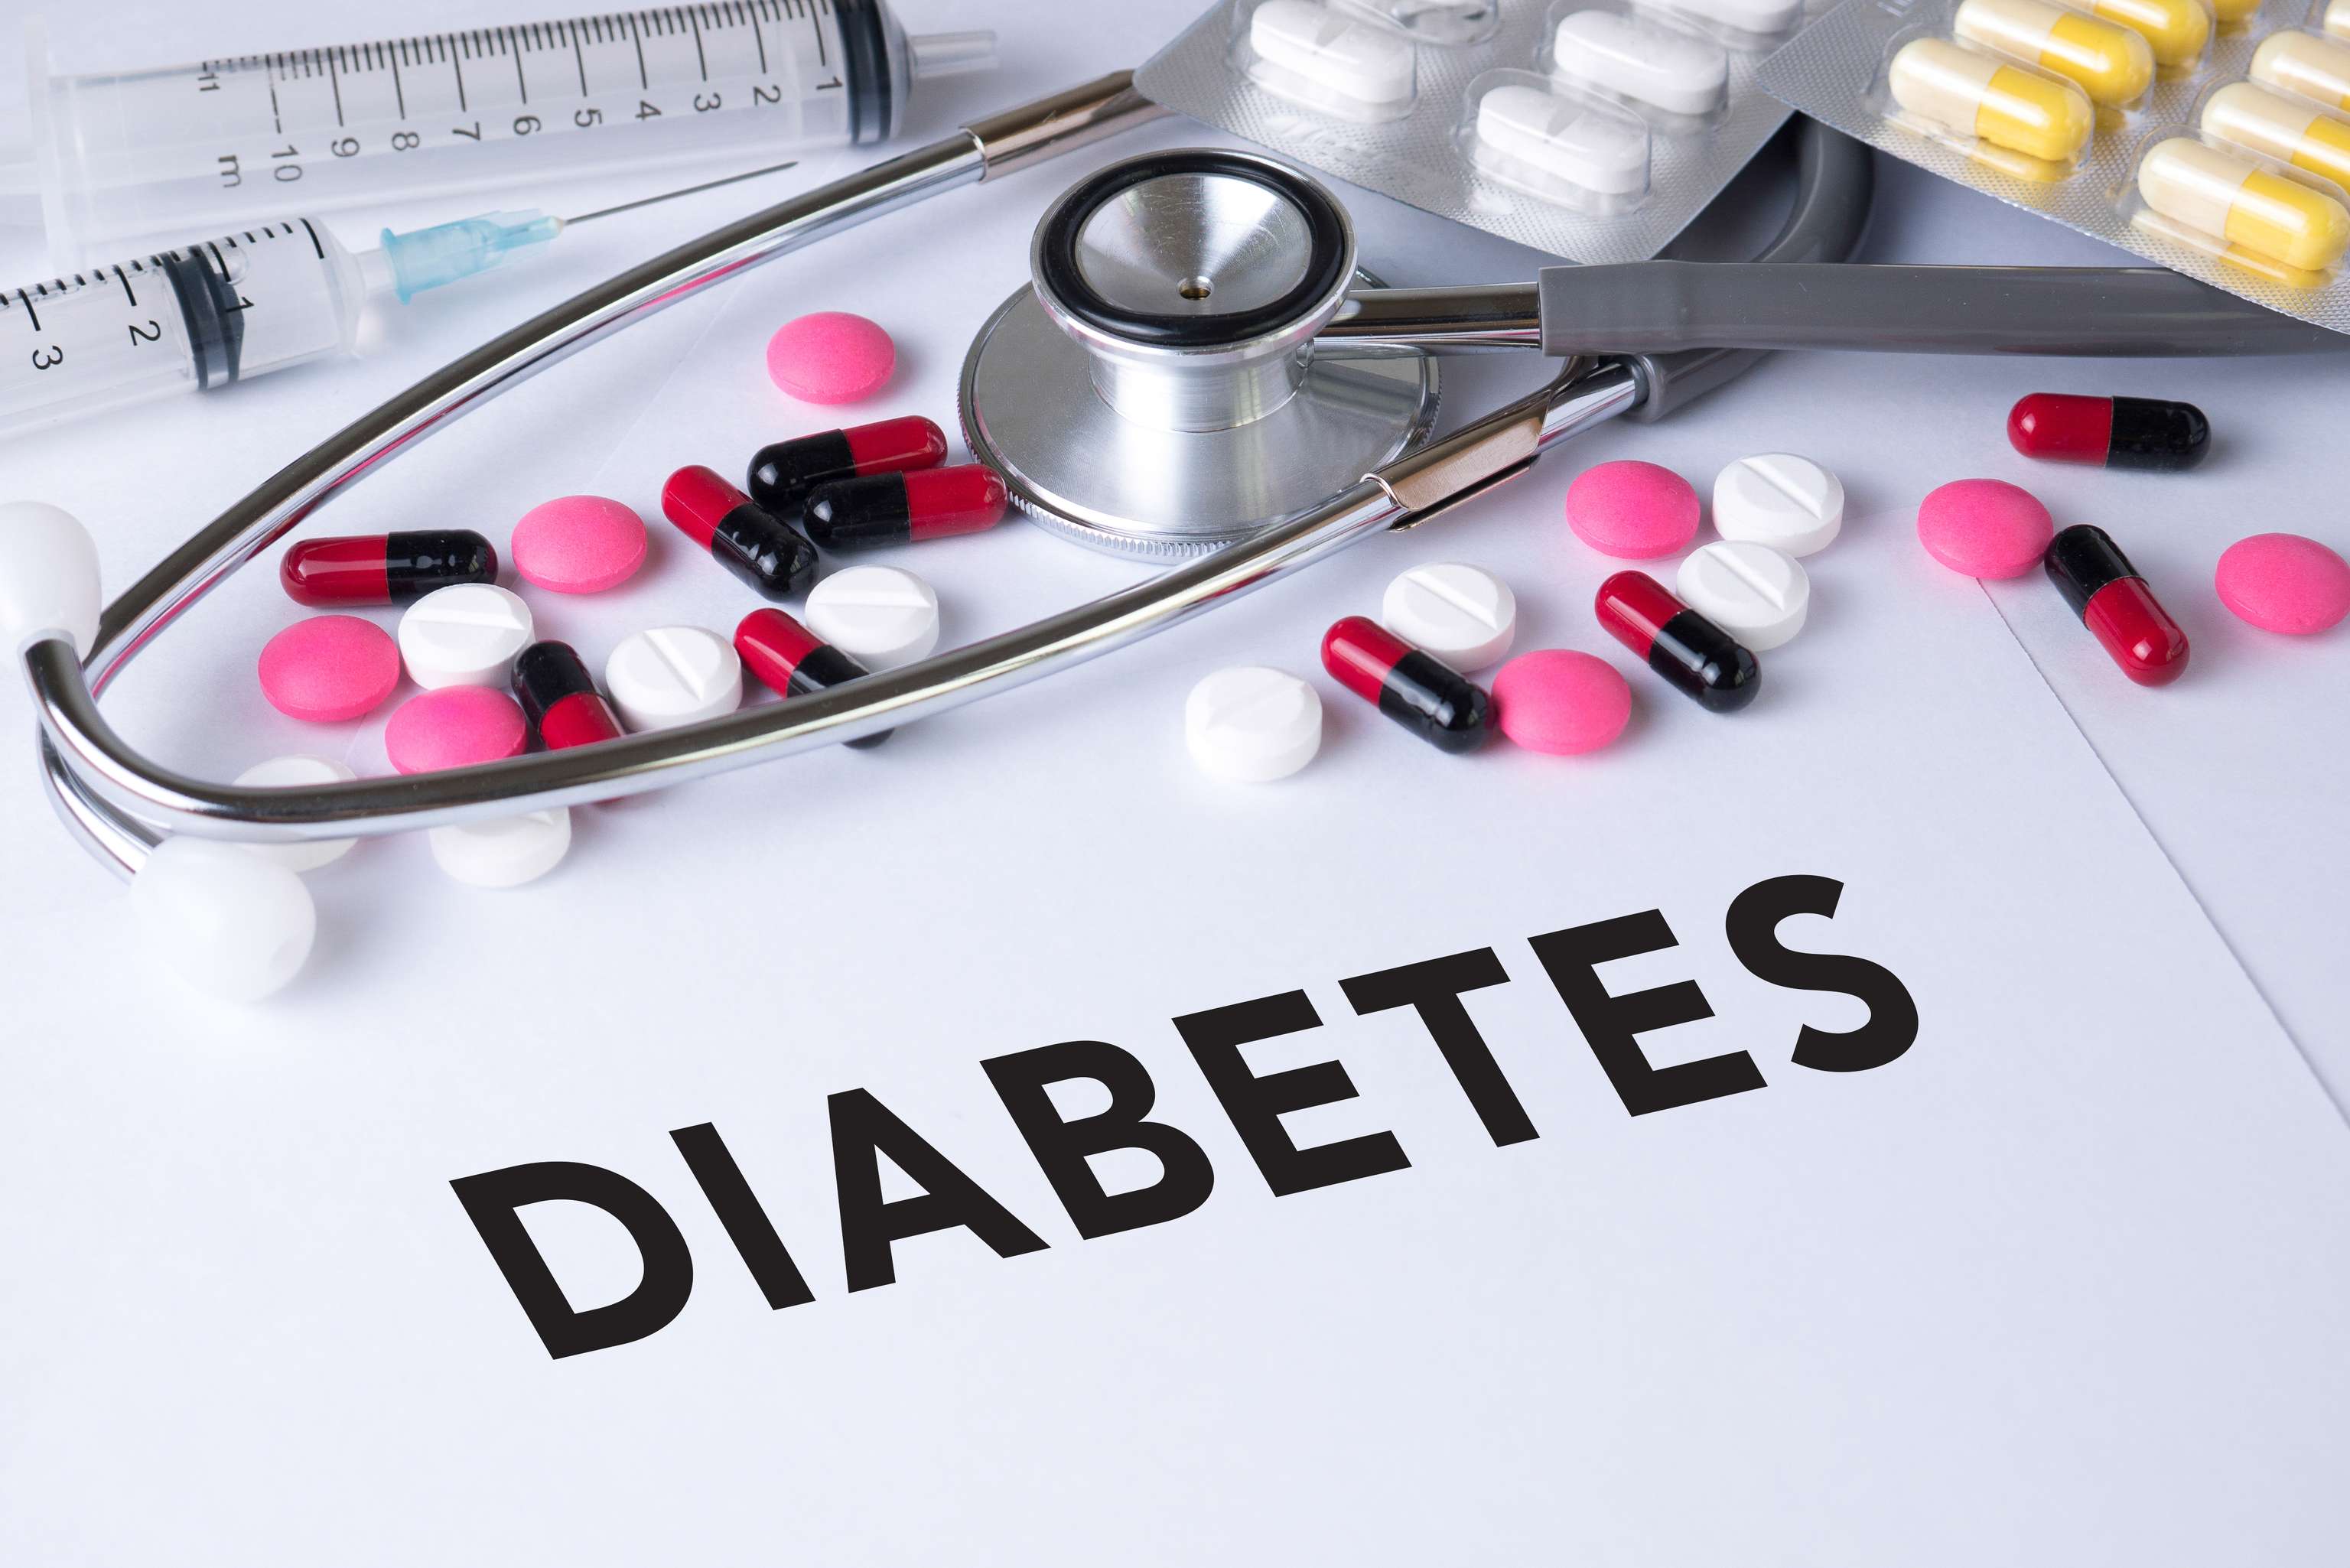 Diabetes drug shows weight loss in non-diabetics in new study